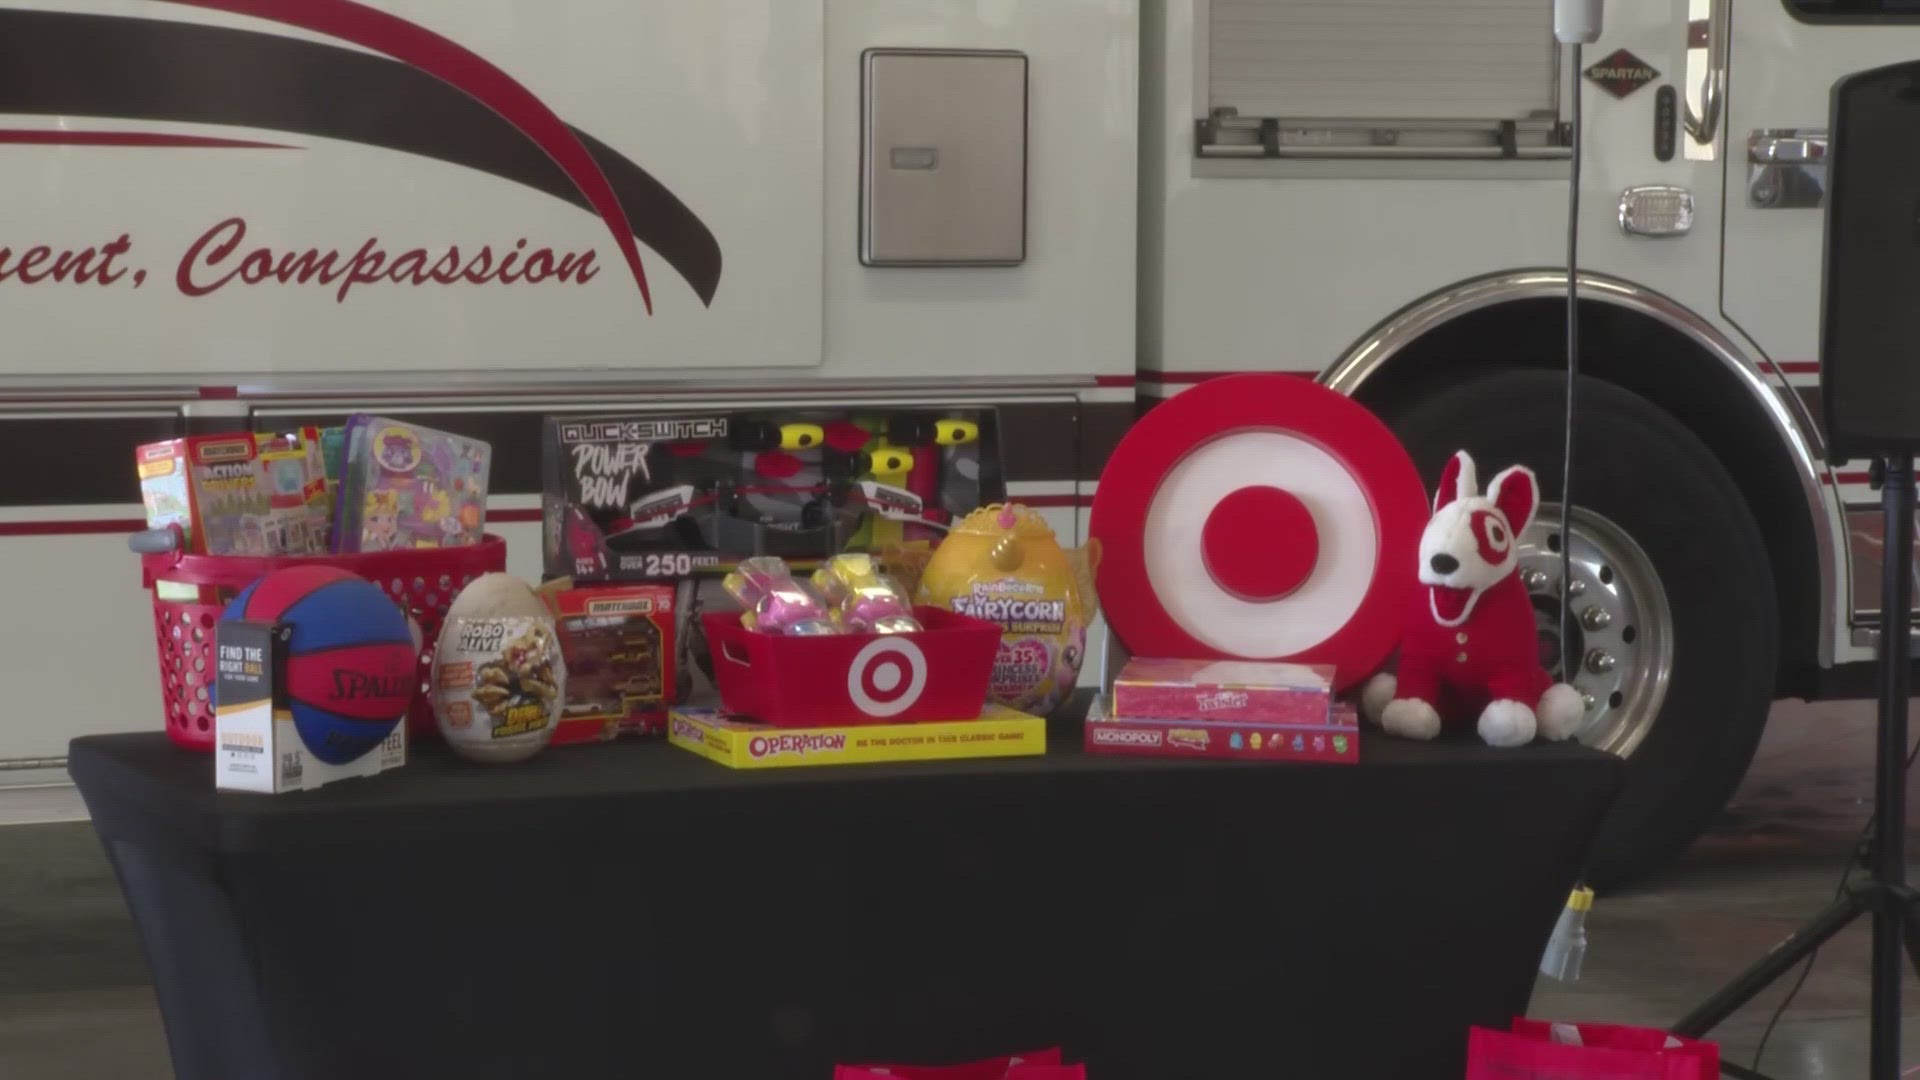 "Operation Stocking Stuffer" helps the fire department get toys to nearly 10,000 families during the holiday season